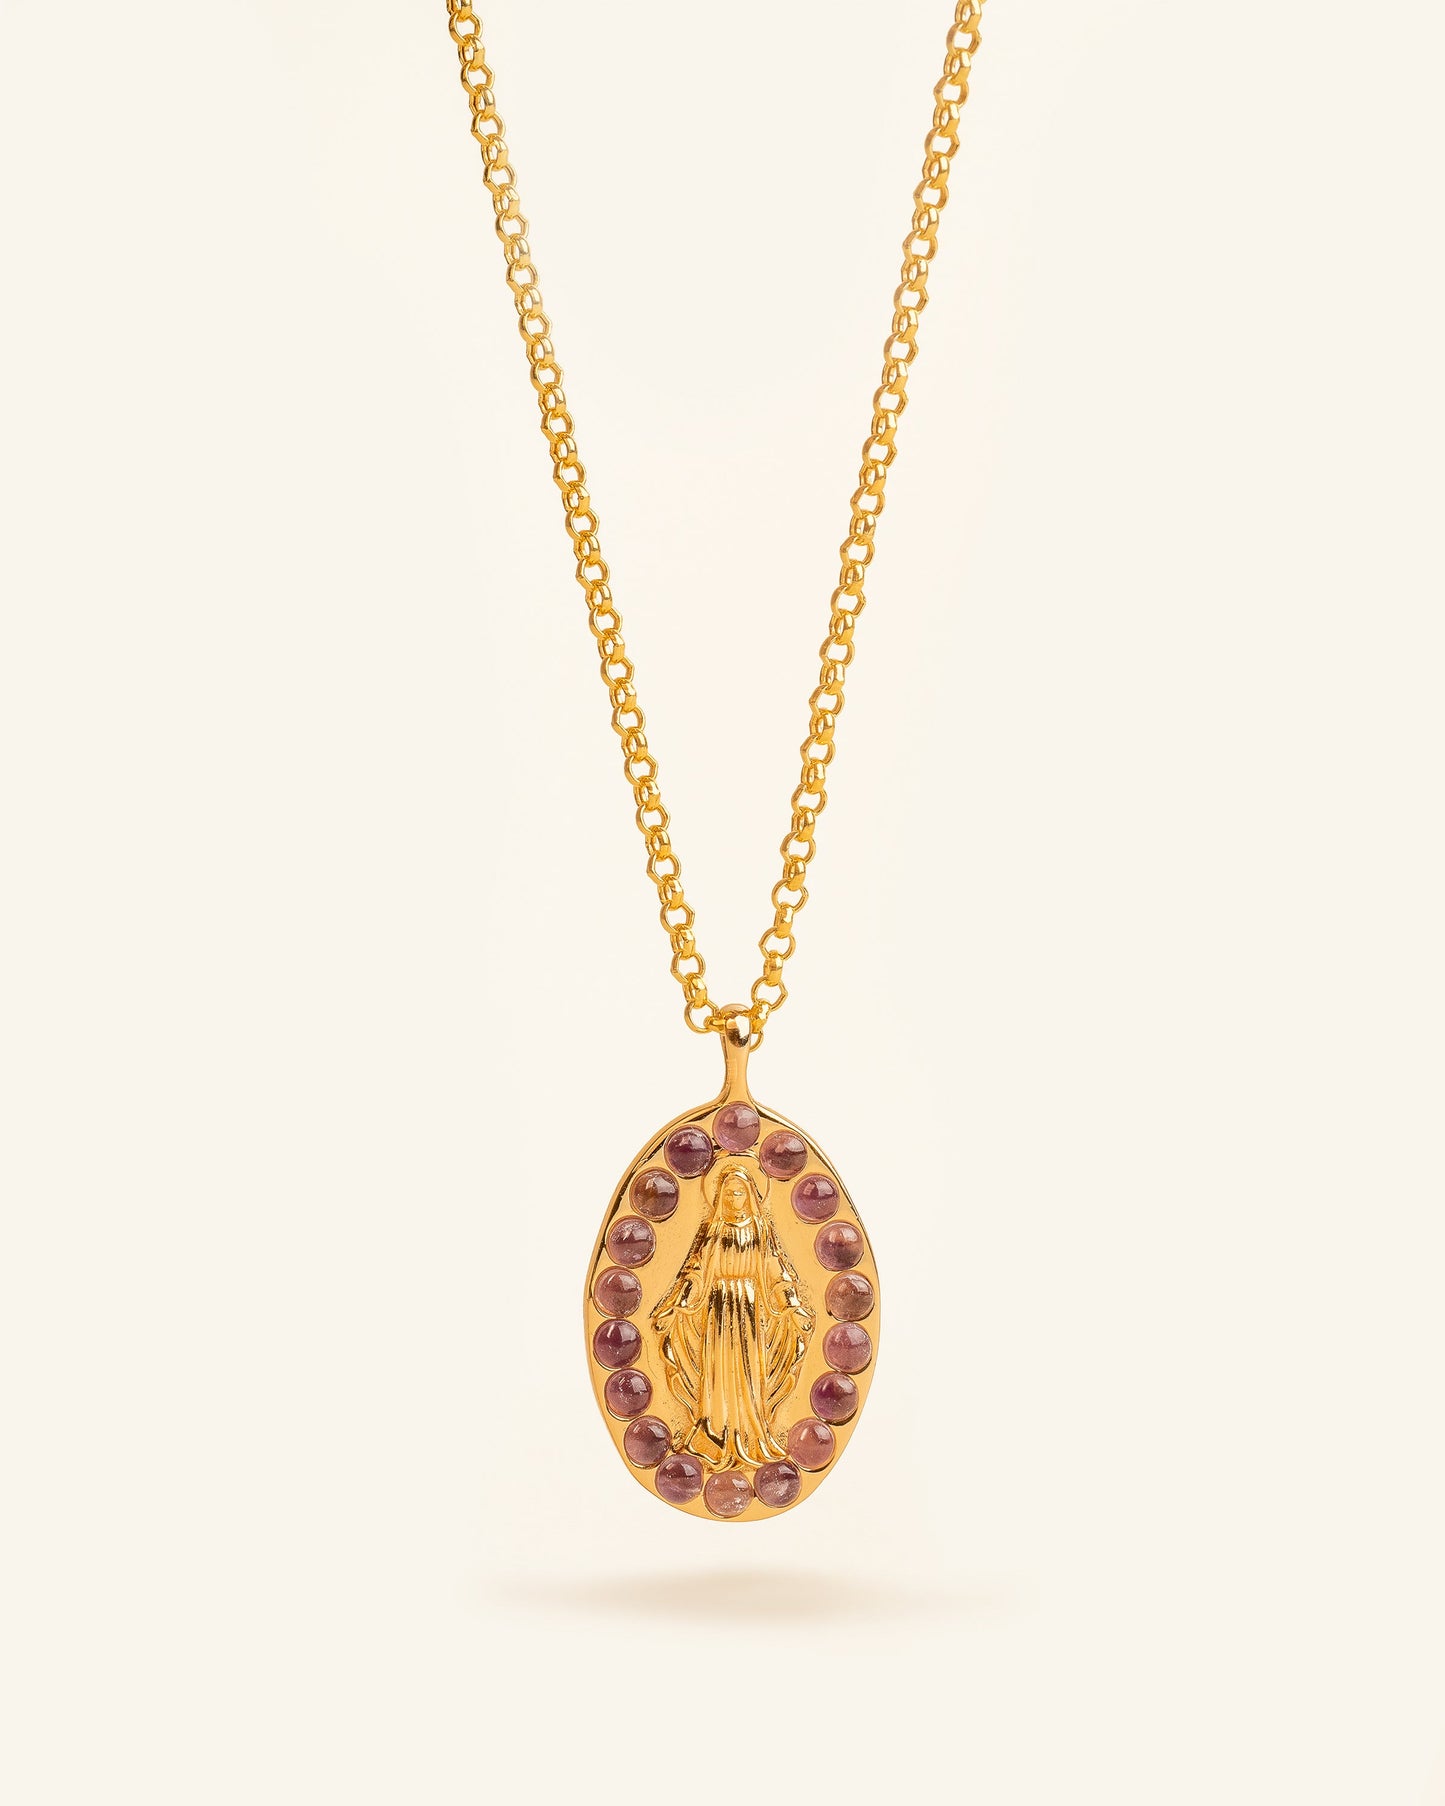 Virgin of the Miraculous Medal with amethyst